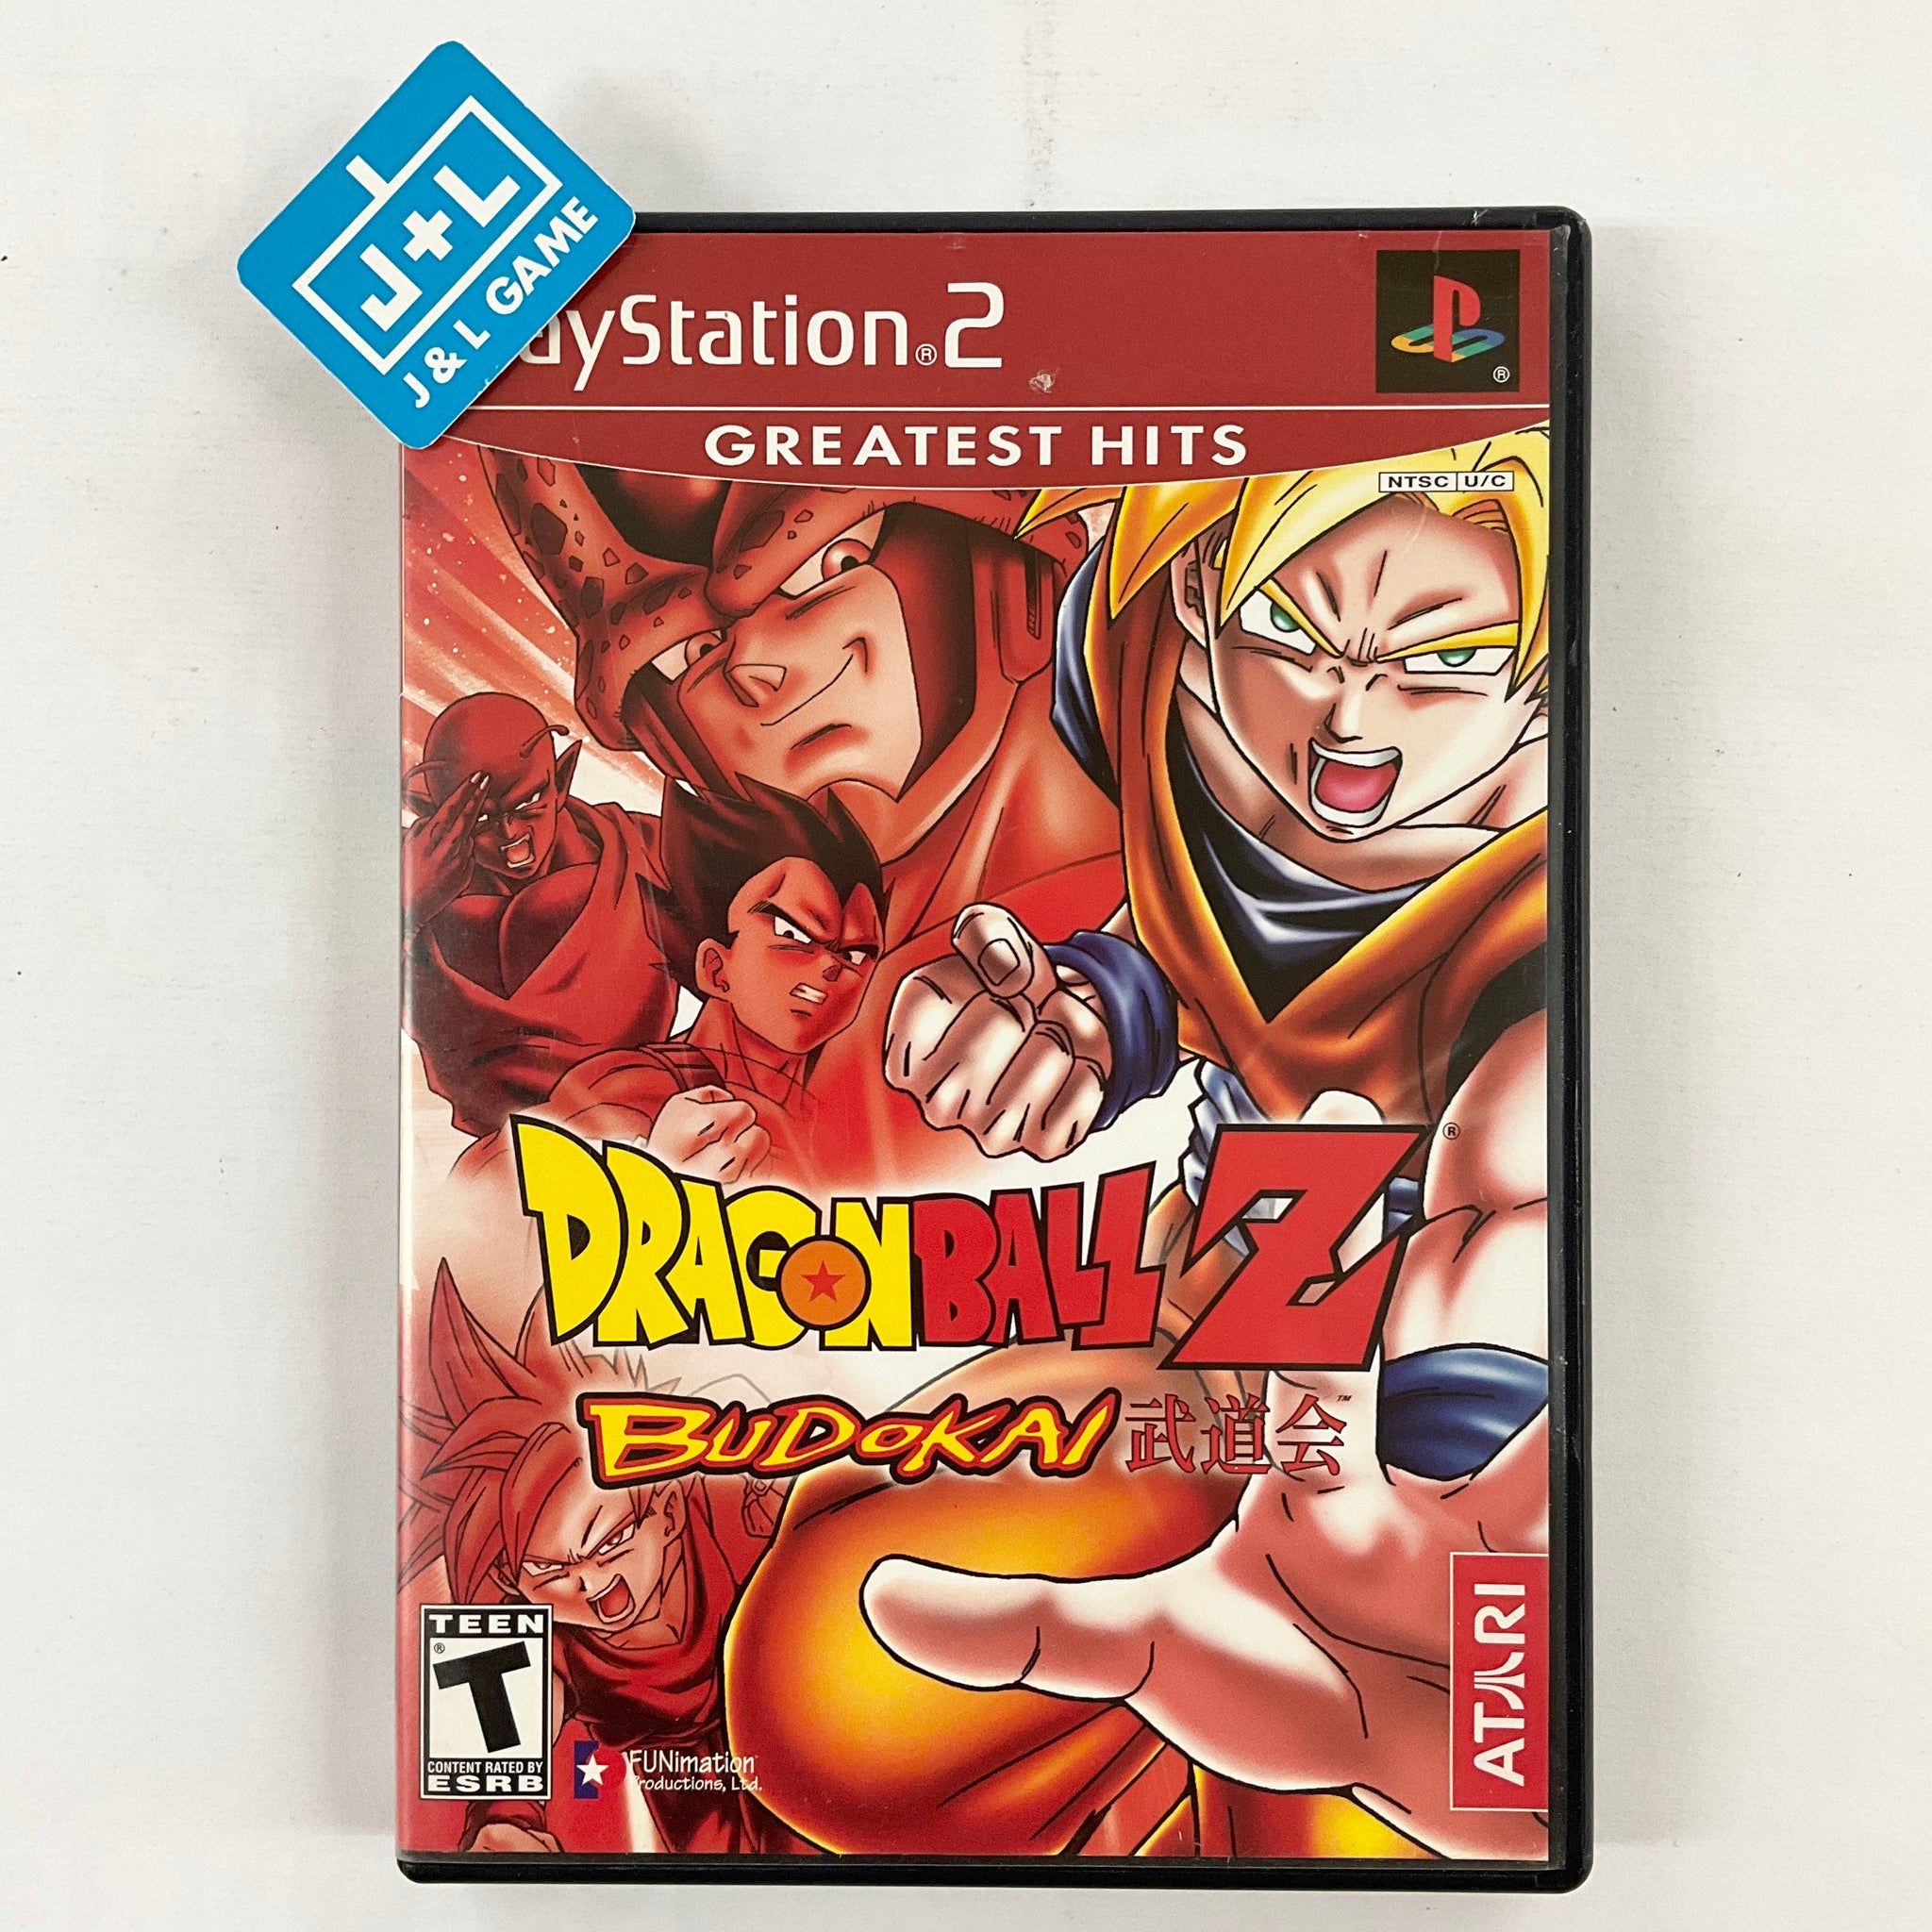 All Dragon Ball Games for PlayStation 2 